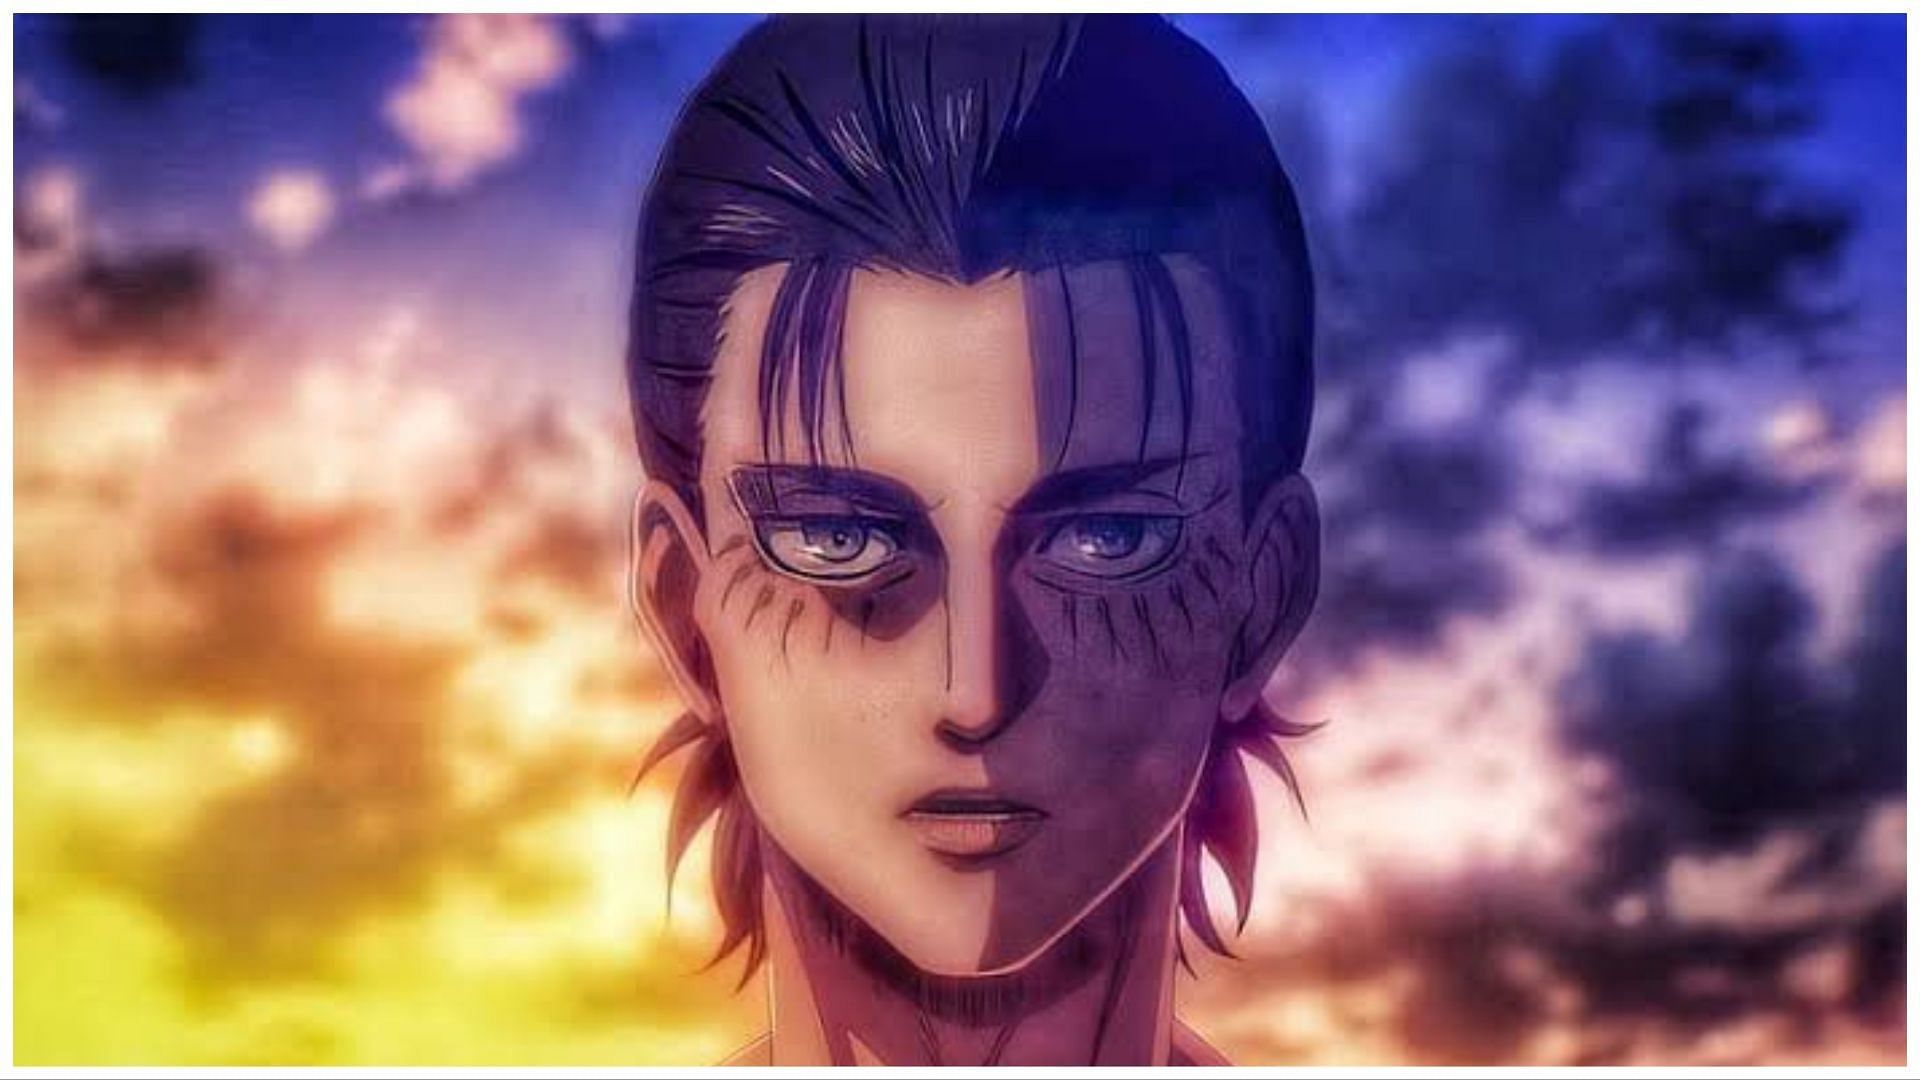 Attack on Titan&#039;s Eren Yeager is often considered to be one of overrated anime characters (Image Via MAPPA)